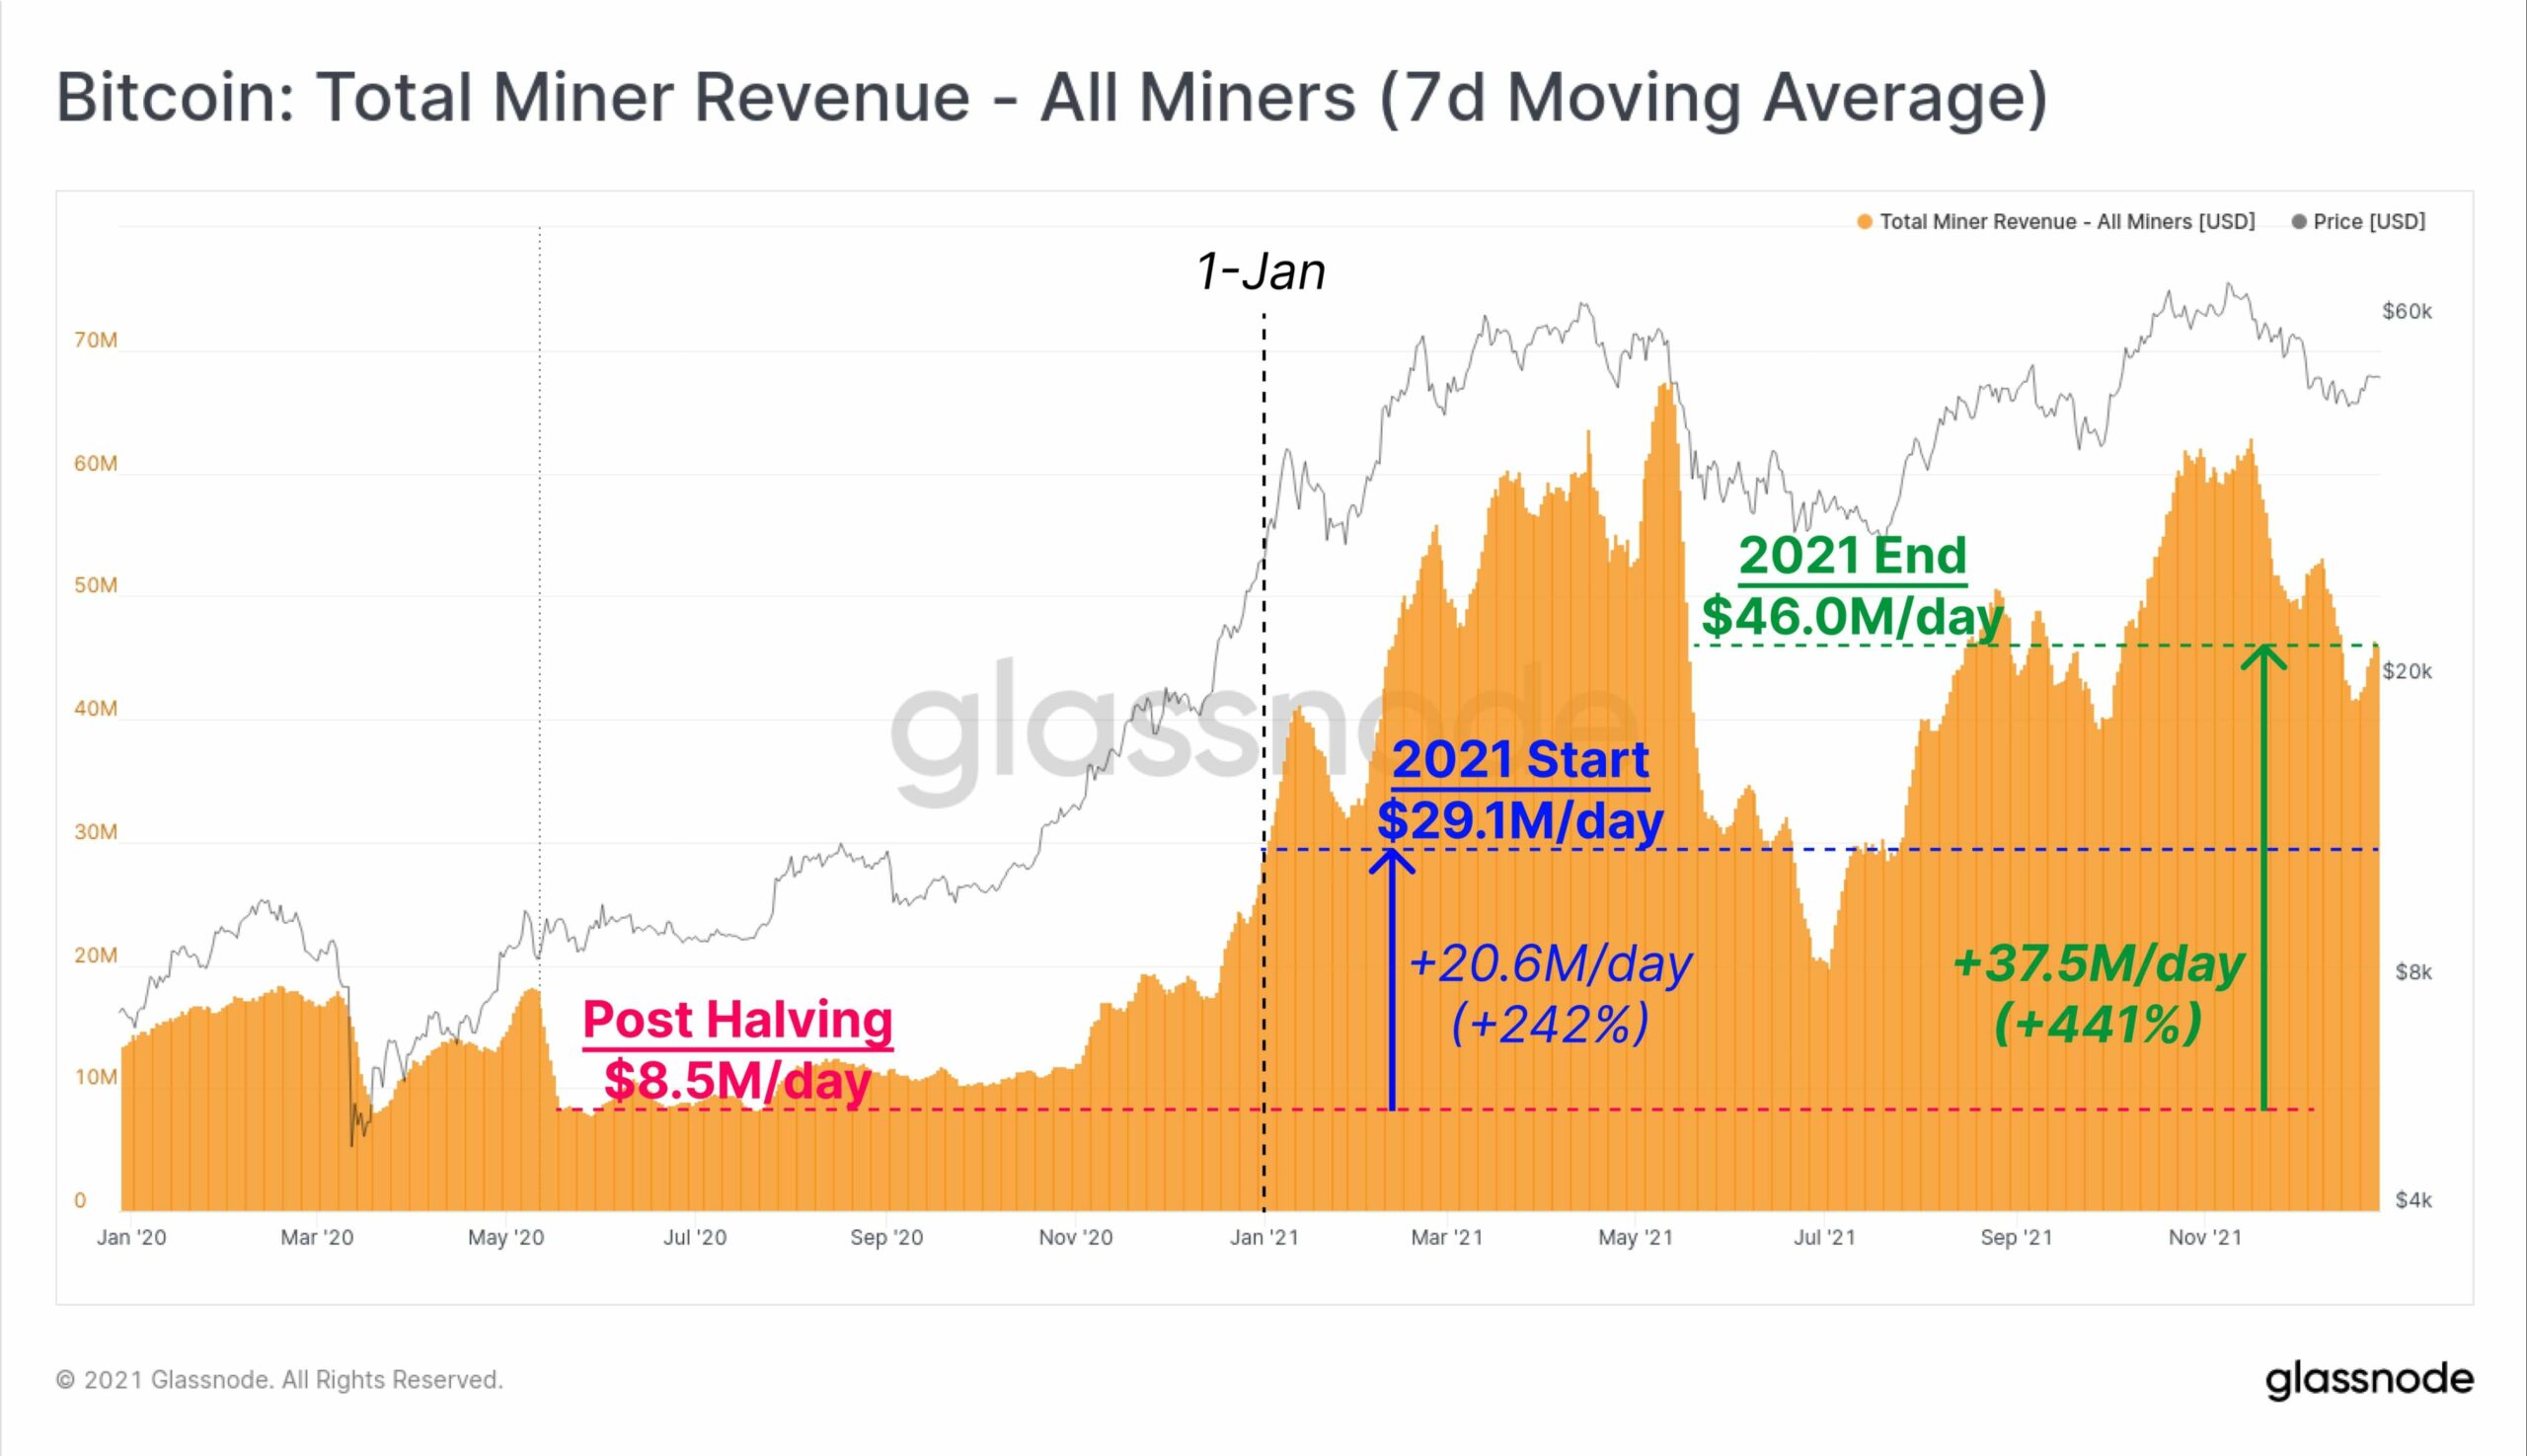 Bitcoin: Total Miner Revenue - All Miners (7d Moving Average)